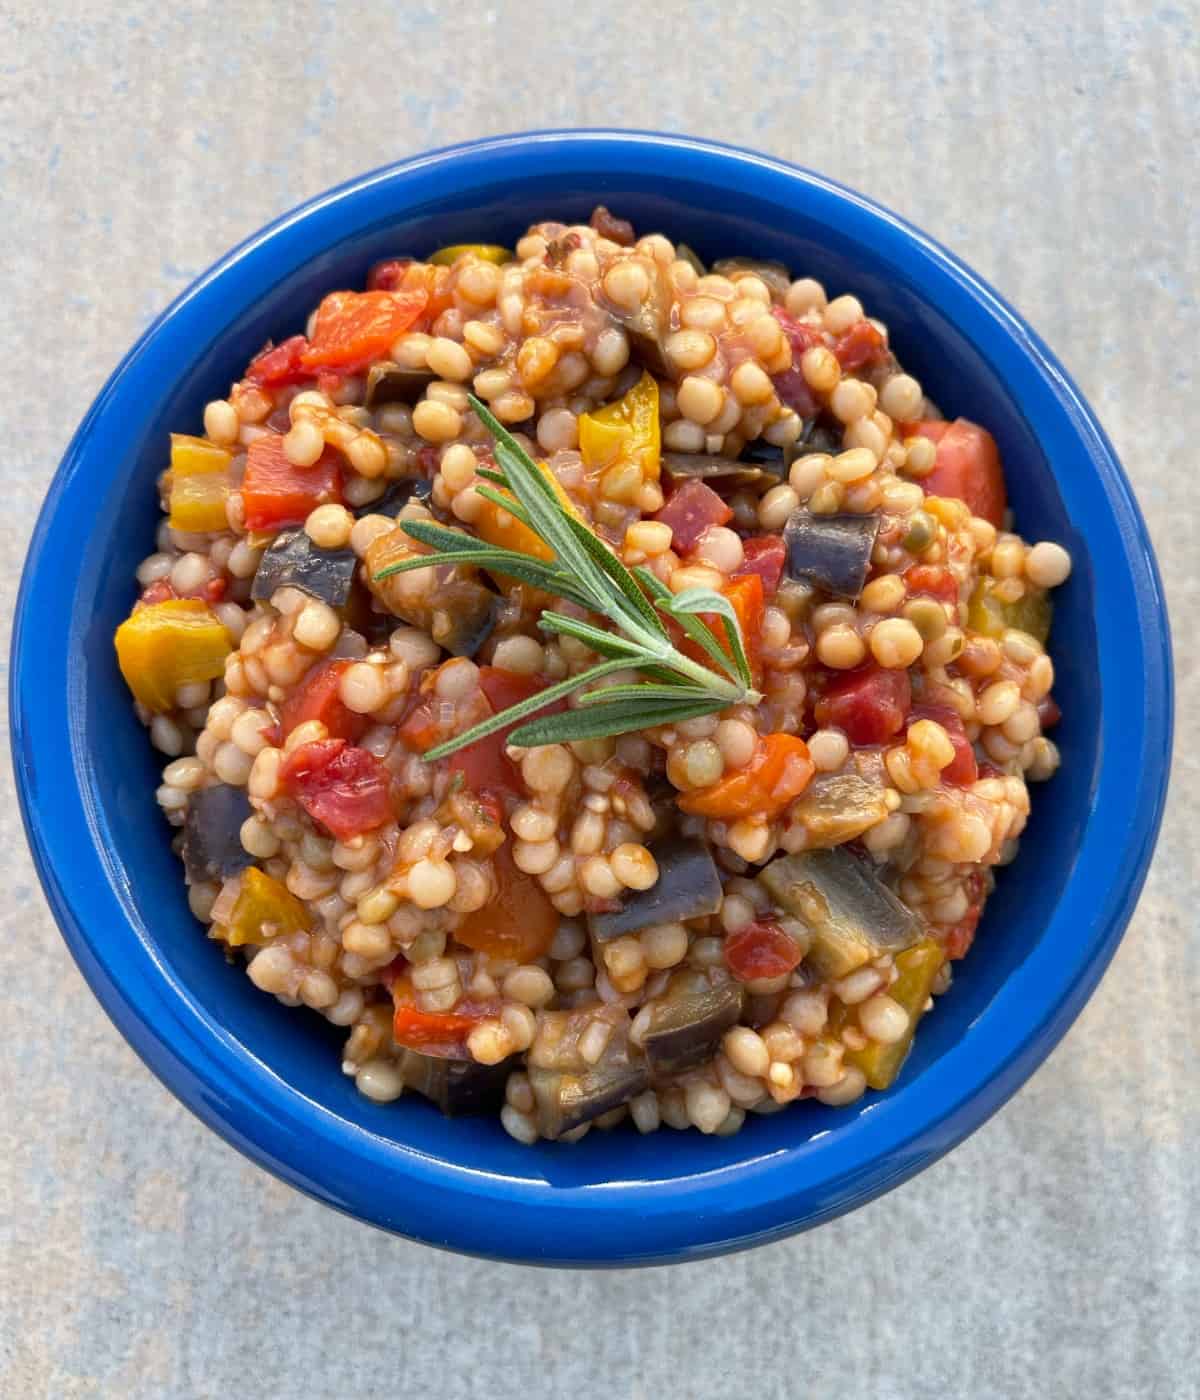 Instant pot Israeli couscous puttanesca in blue serving bowl with sprig of fresh rosemary.